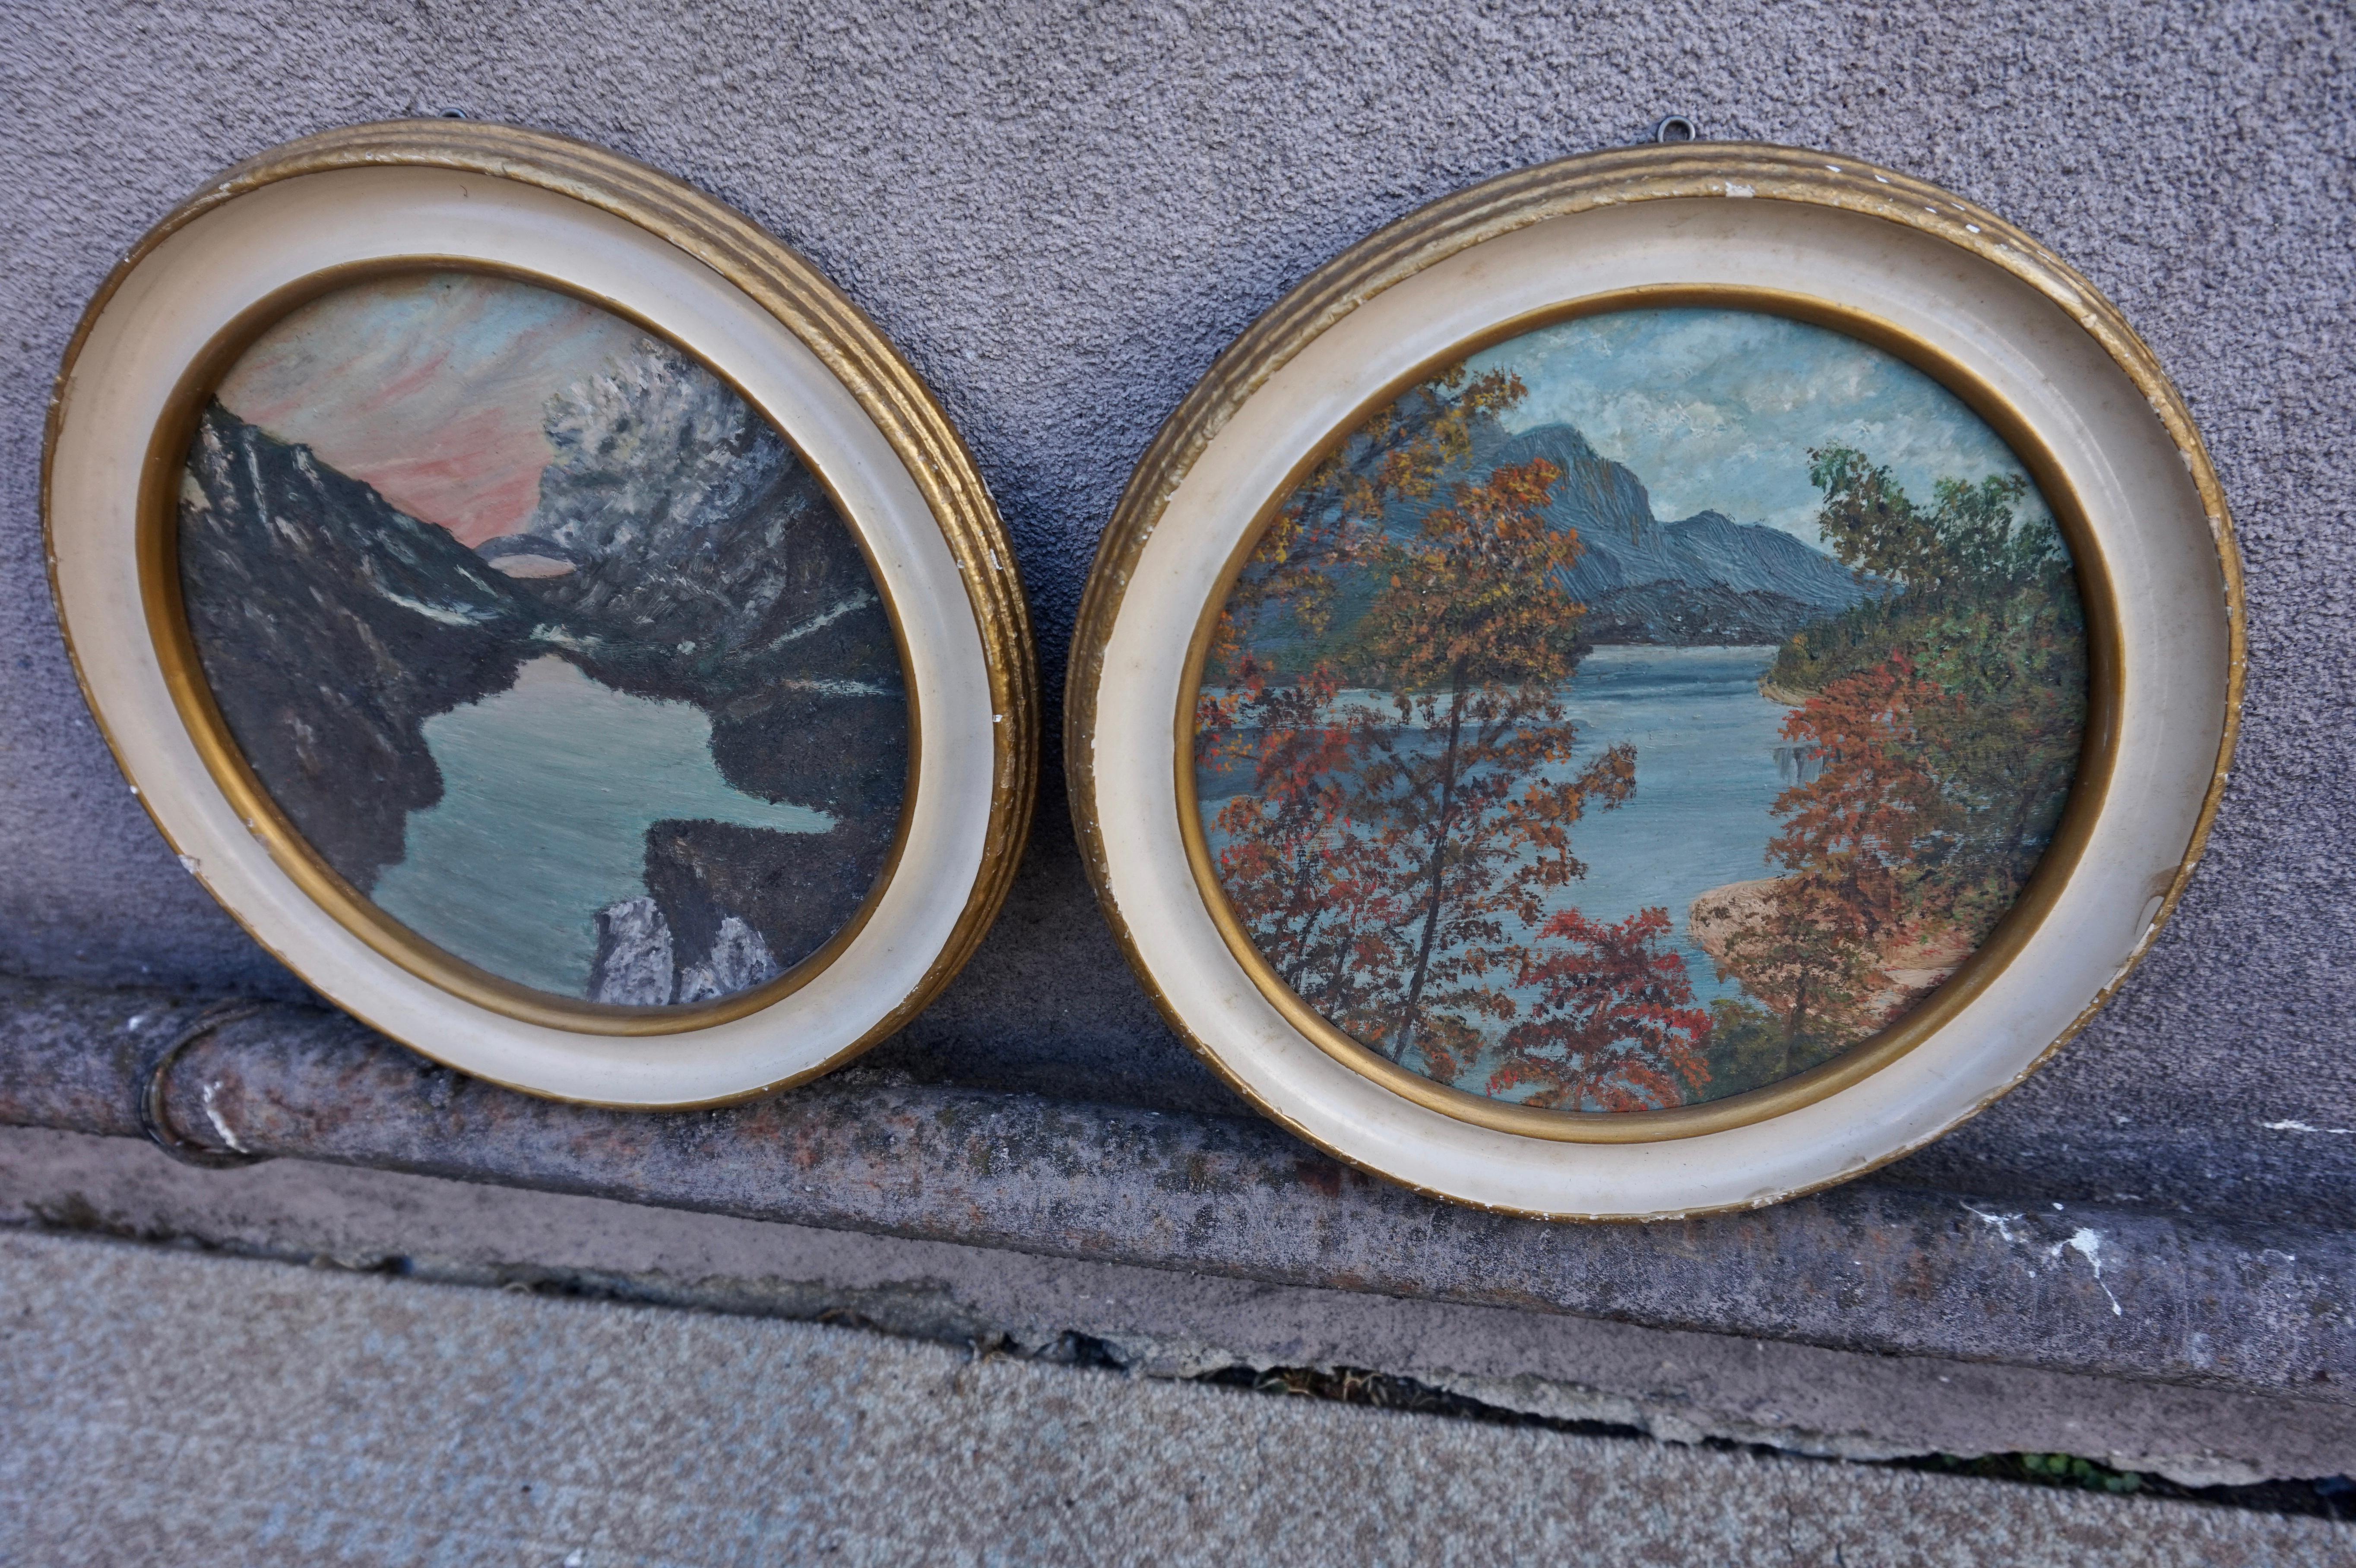 Rare circular Art Deco scenes of the Smoky Mountains with date and details rendered behind the paintings. Beautifully hand painted in vivid hues and original circular gilt frames. Embellish your cabin or wall space with these. 